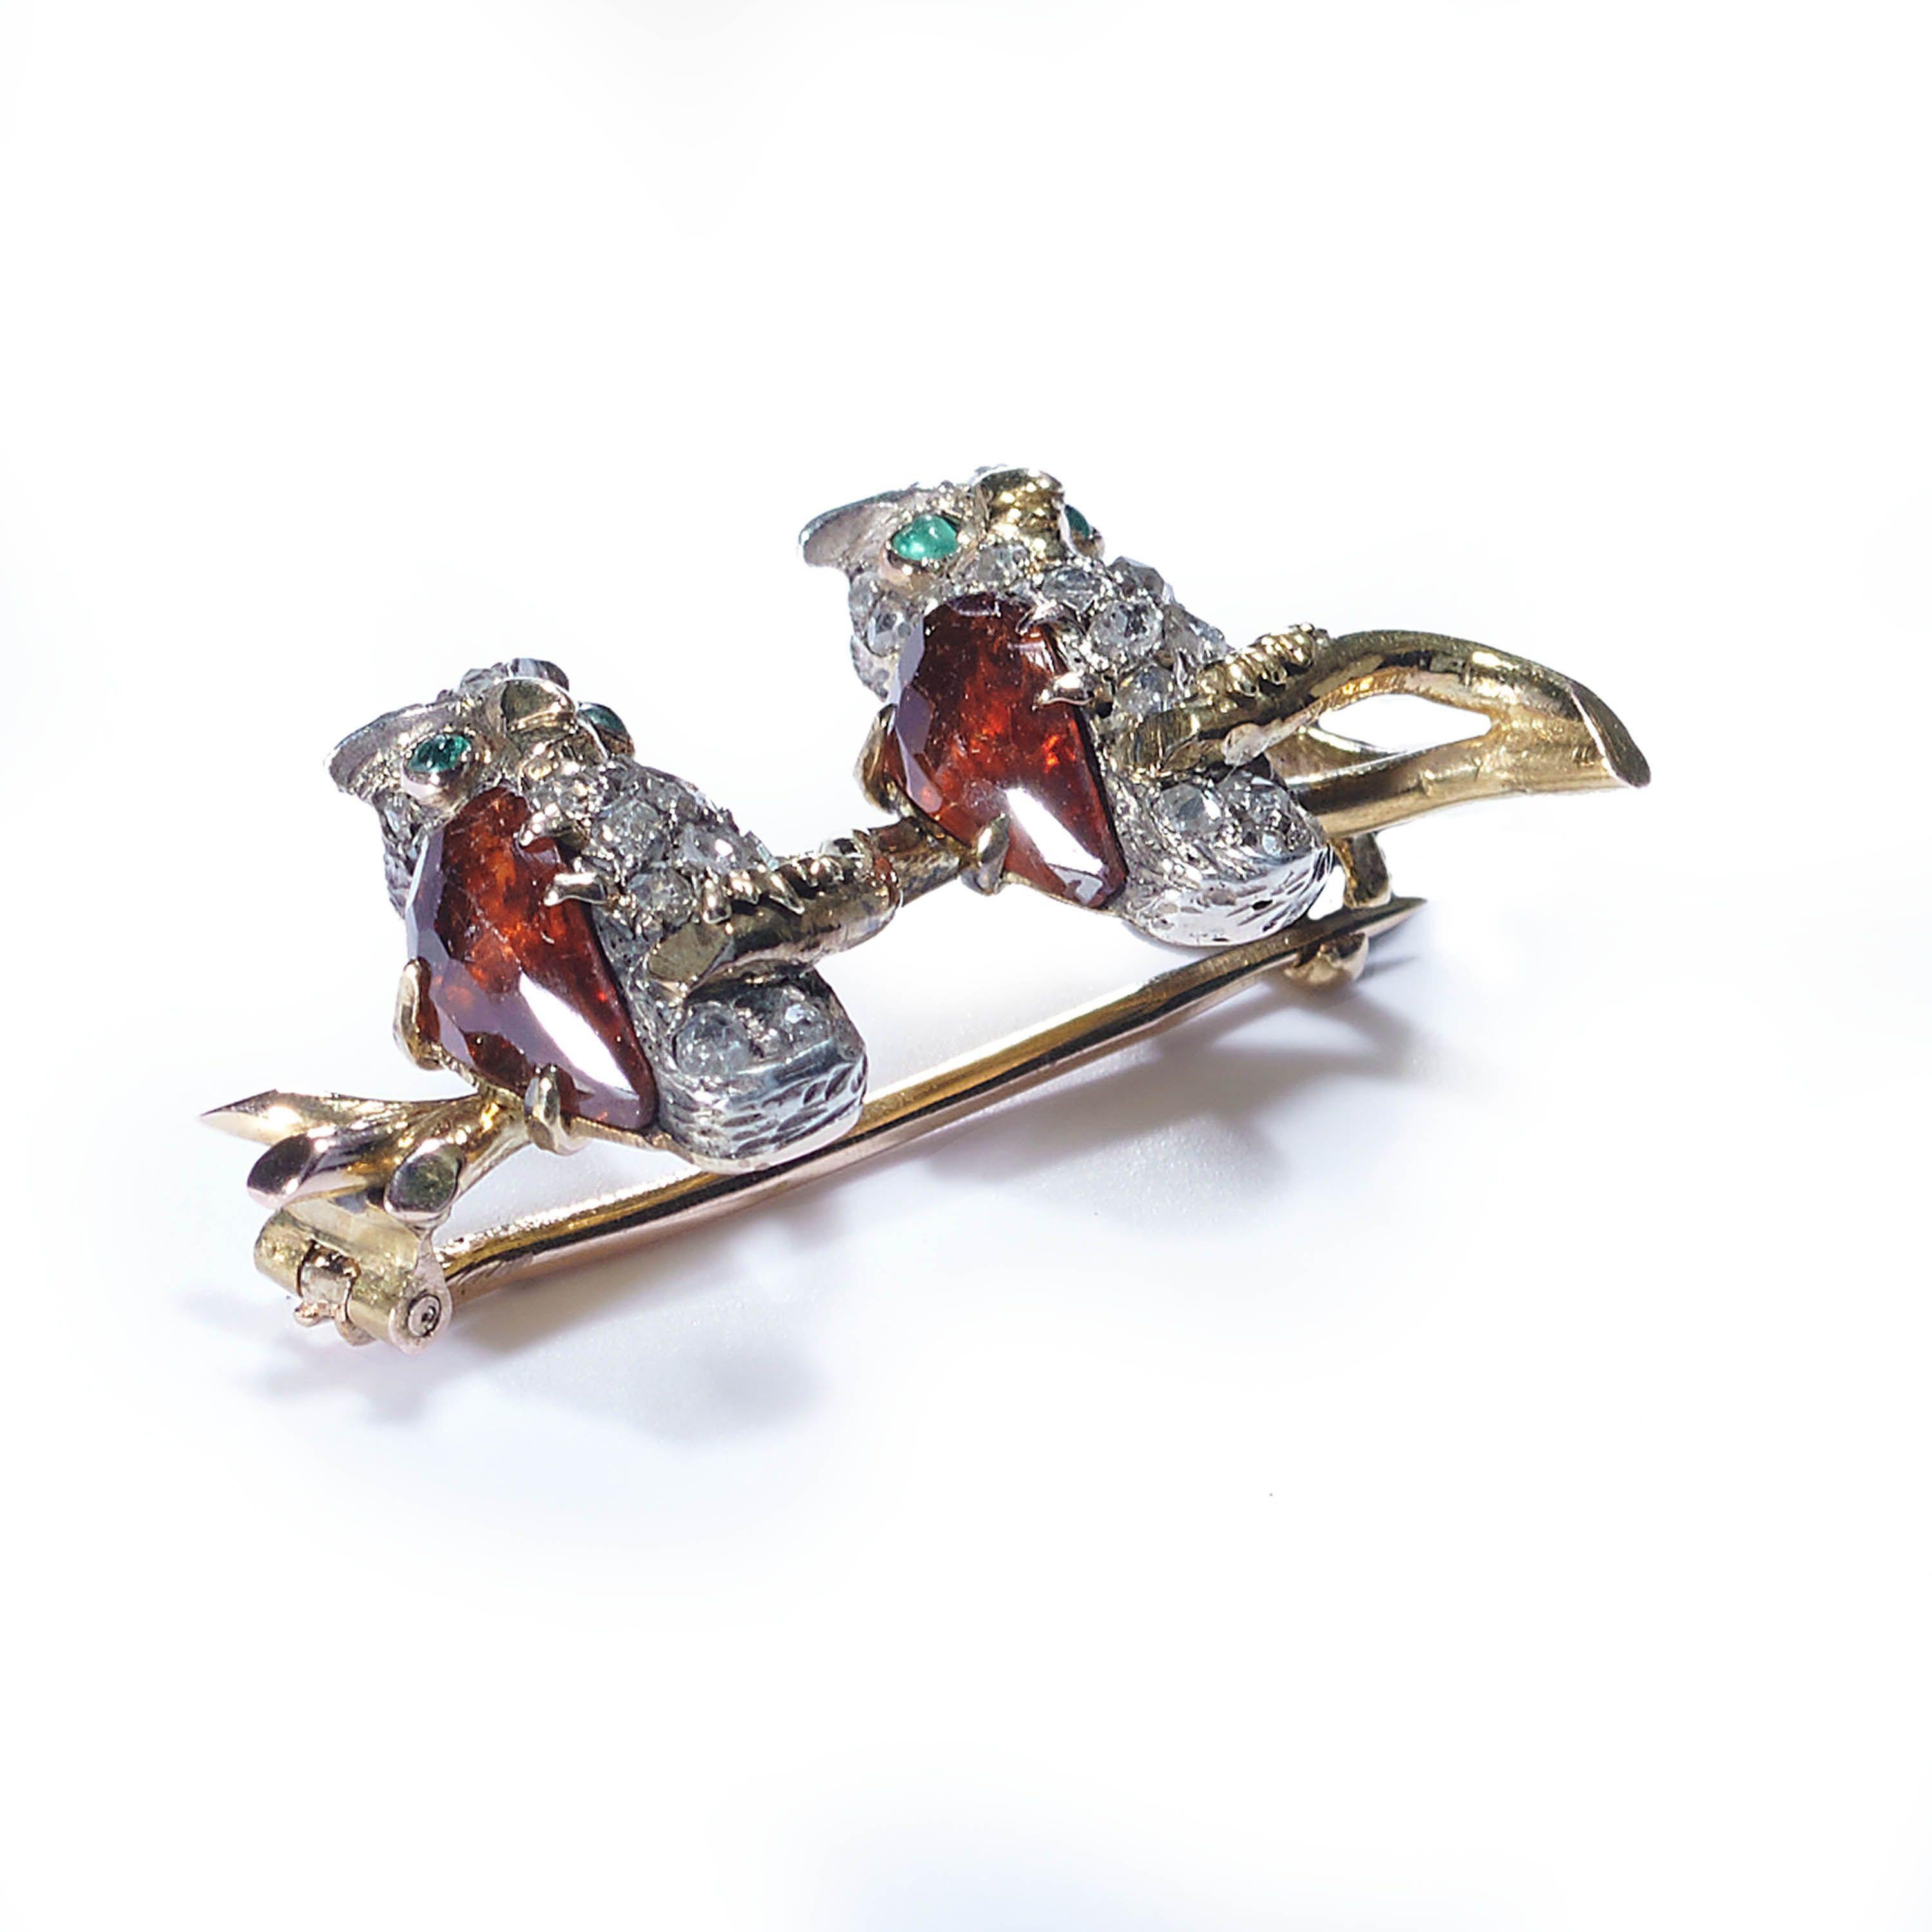 A French antique double owl brooch, with rose-cut diamonds pavé set, in silver, with the breasts represented by faceted hessonite garnets and the eyes set with cabochon-cut emeralds, with the owls sitting on a branch, mounted in gold, with a French